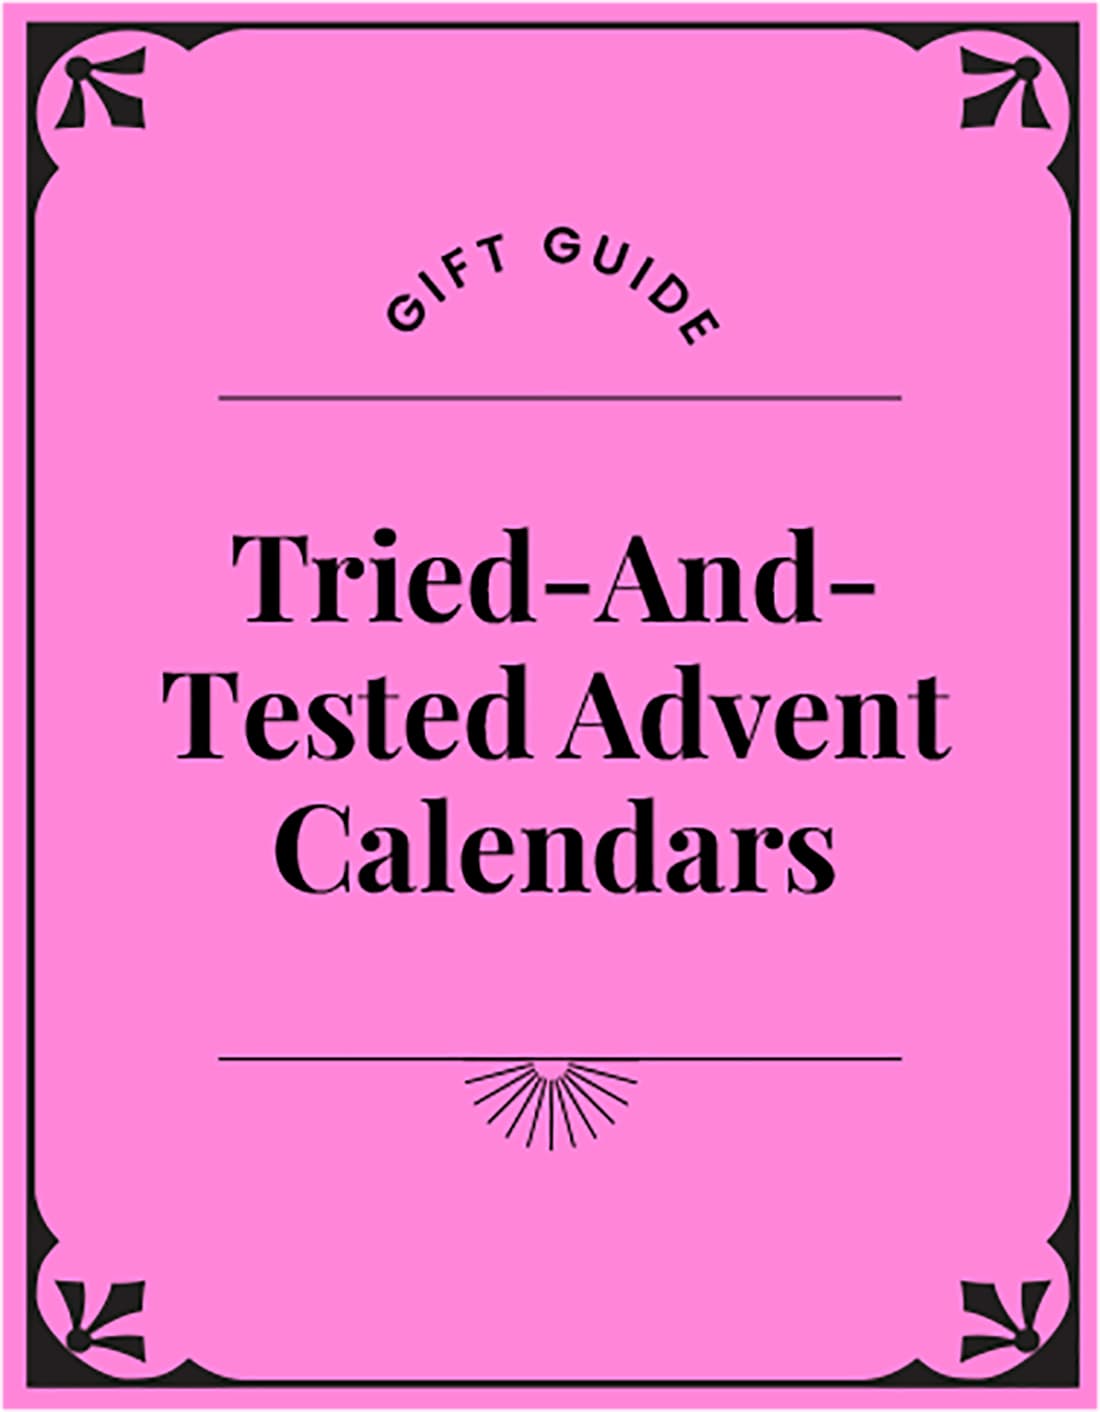 Gift Guide. Tried-And-Tested Advent Calendars.